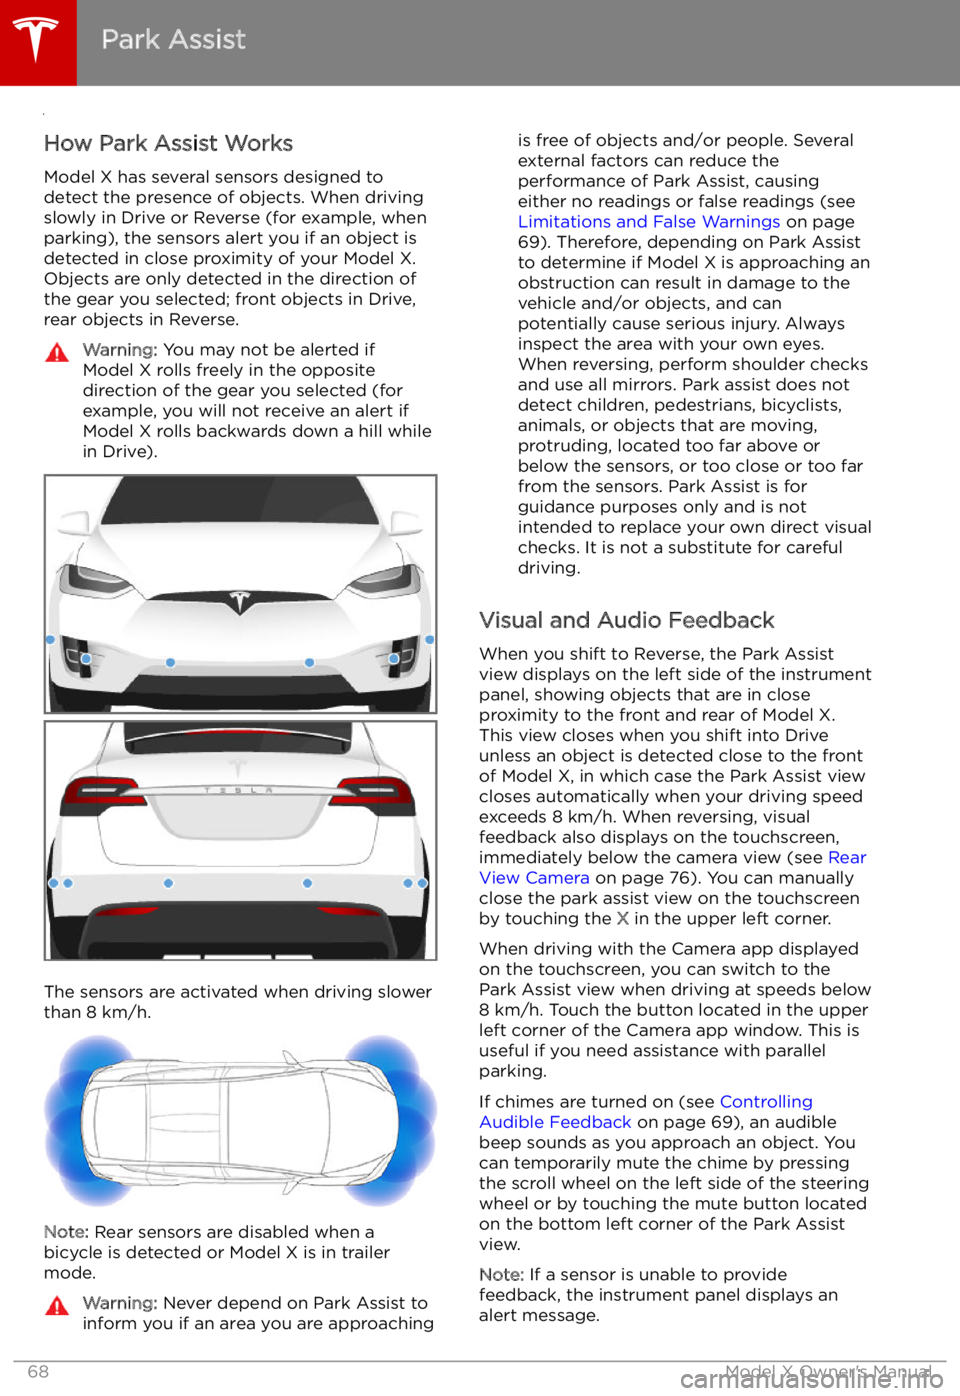 TESLA MODEL X 2021  Owner´s Manual Park Assist
How Park Assist Works
Model X has several sensors designed to
detect the presence of objects. When driving
slowly in Drive or Reverse (for example, when
parking), the sensors alert you if 